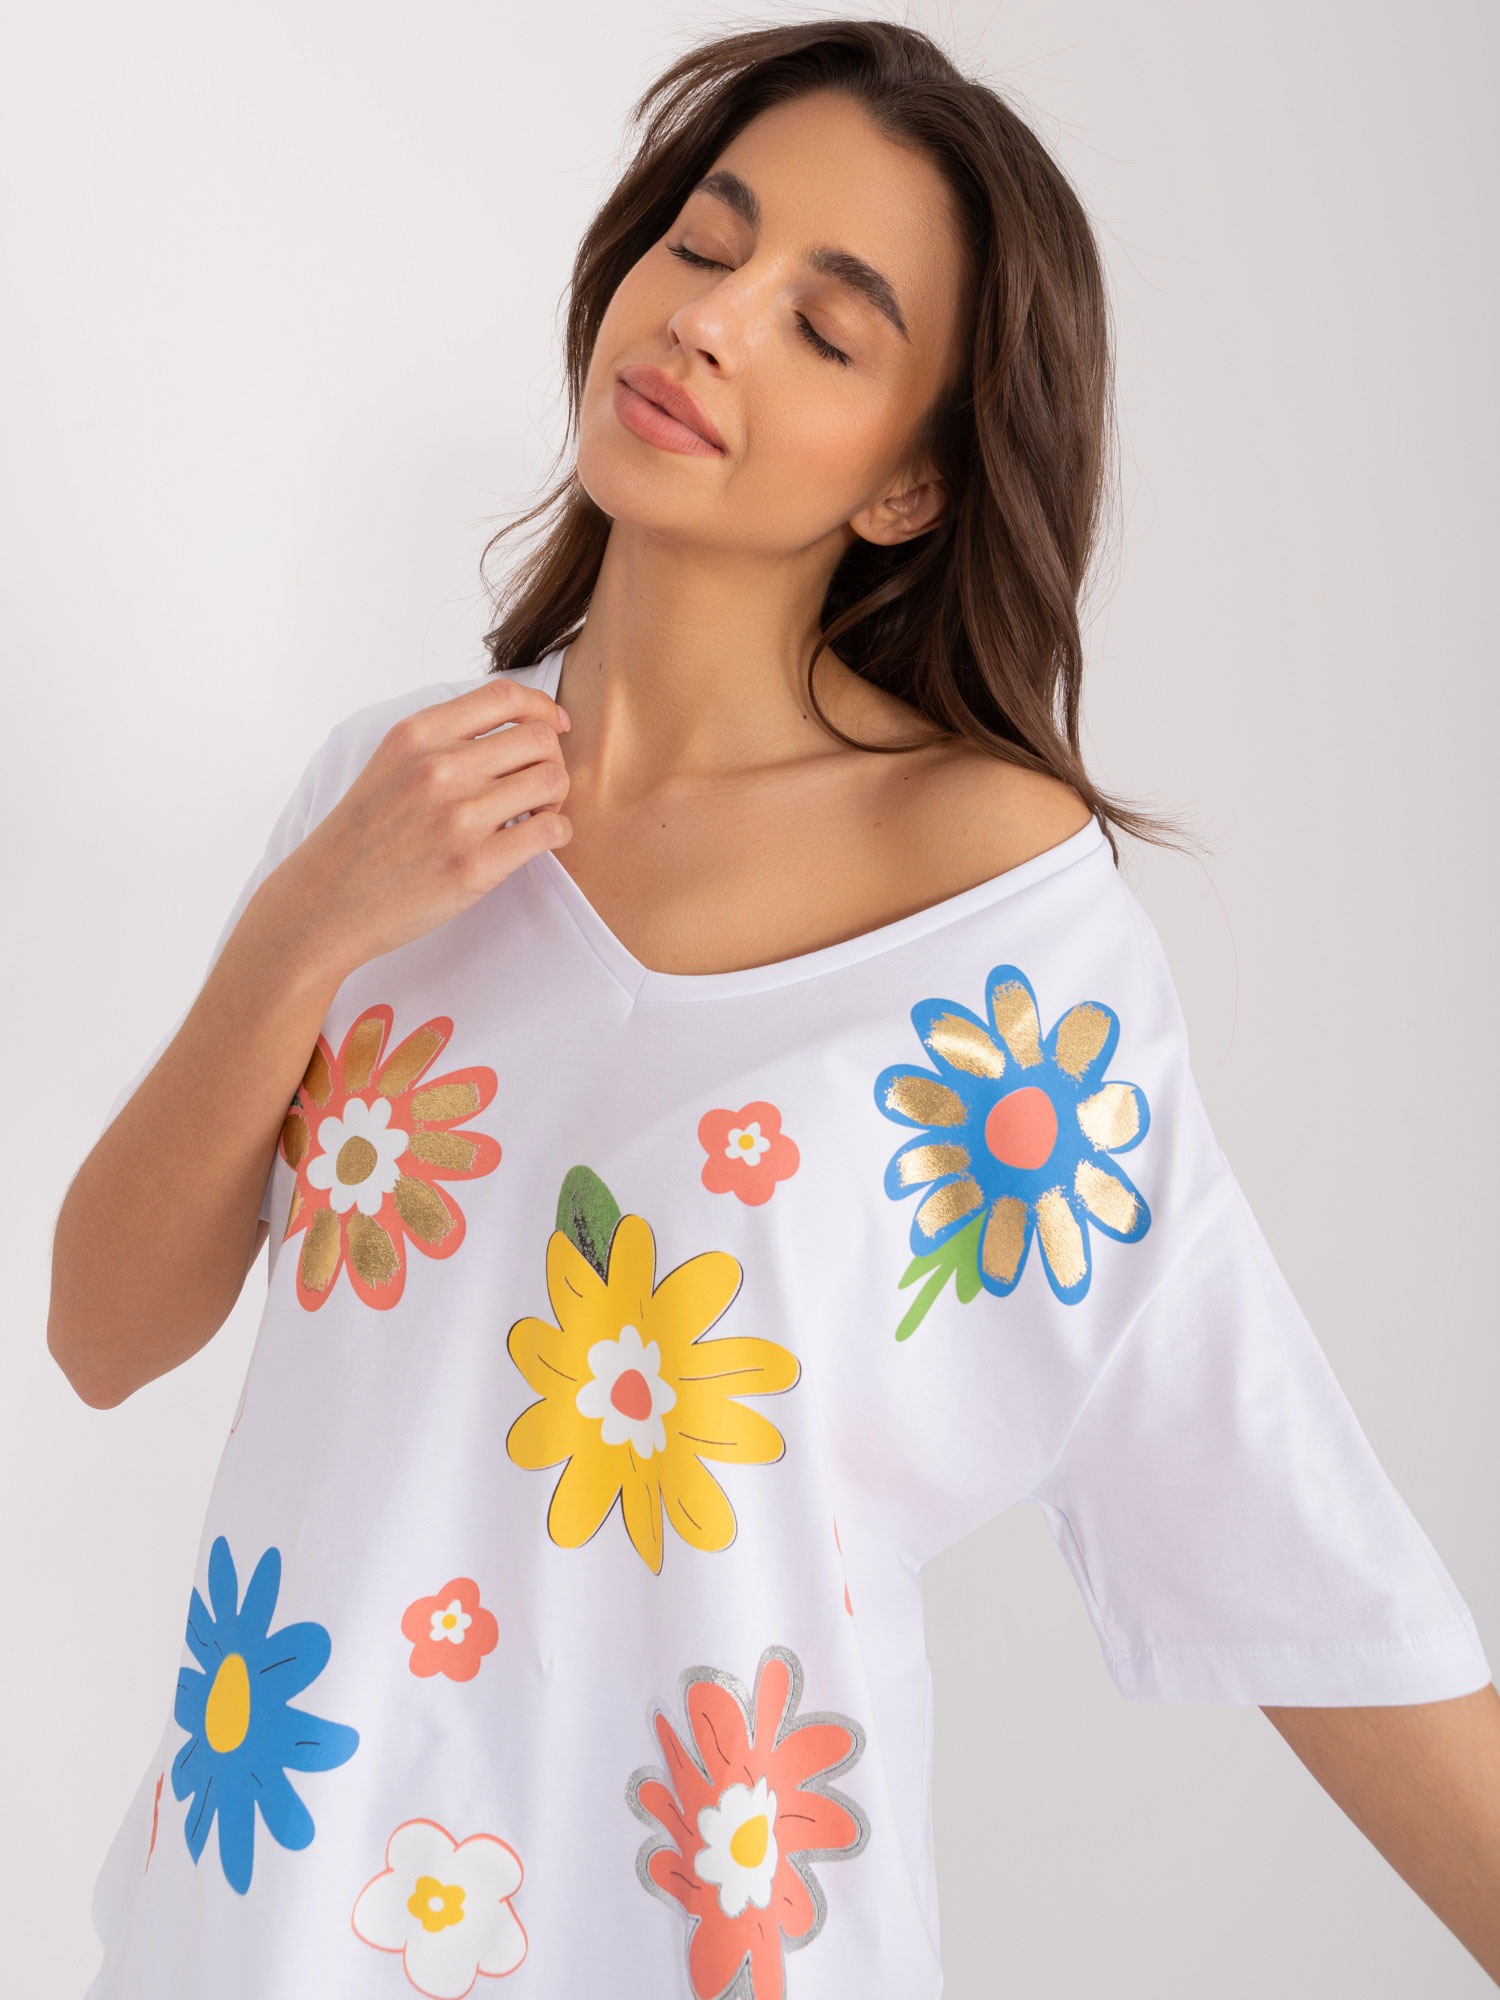 White loose women's blouse with floral pattern